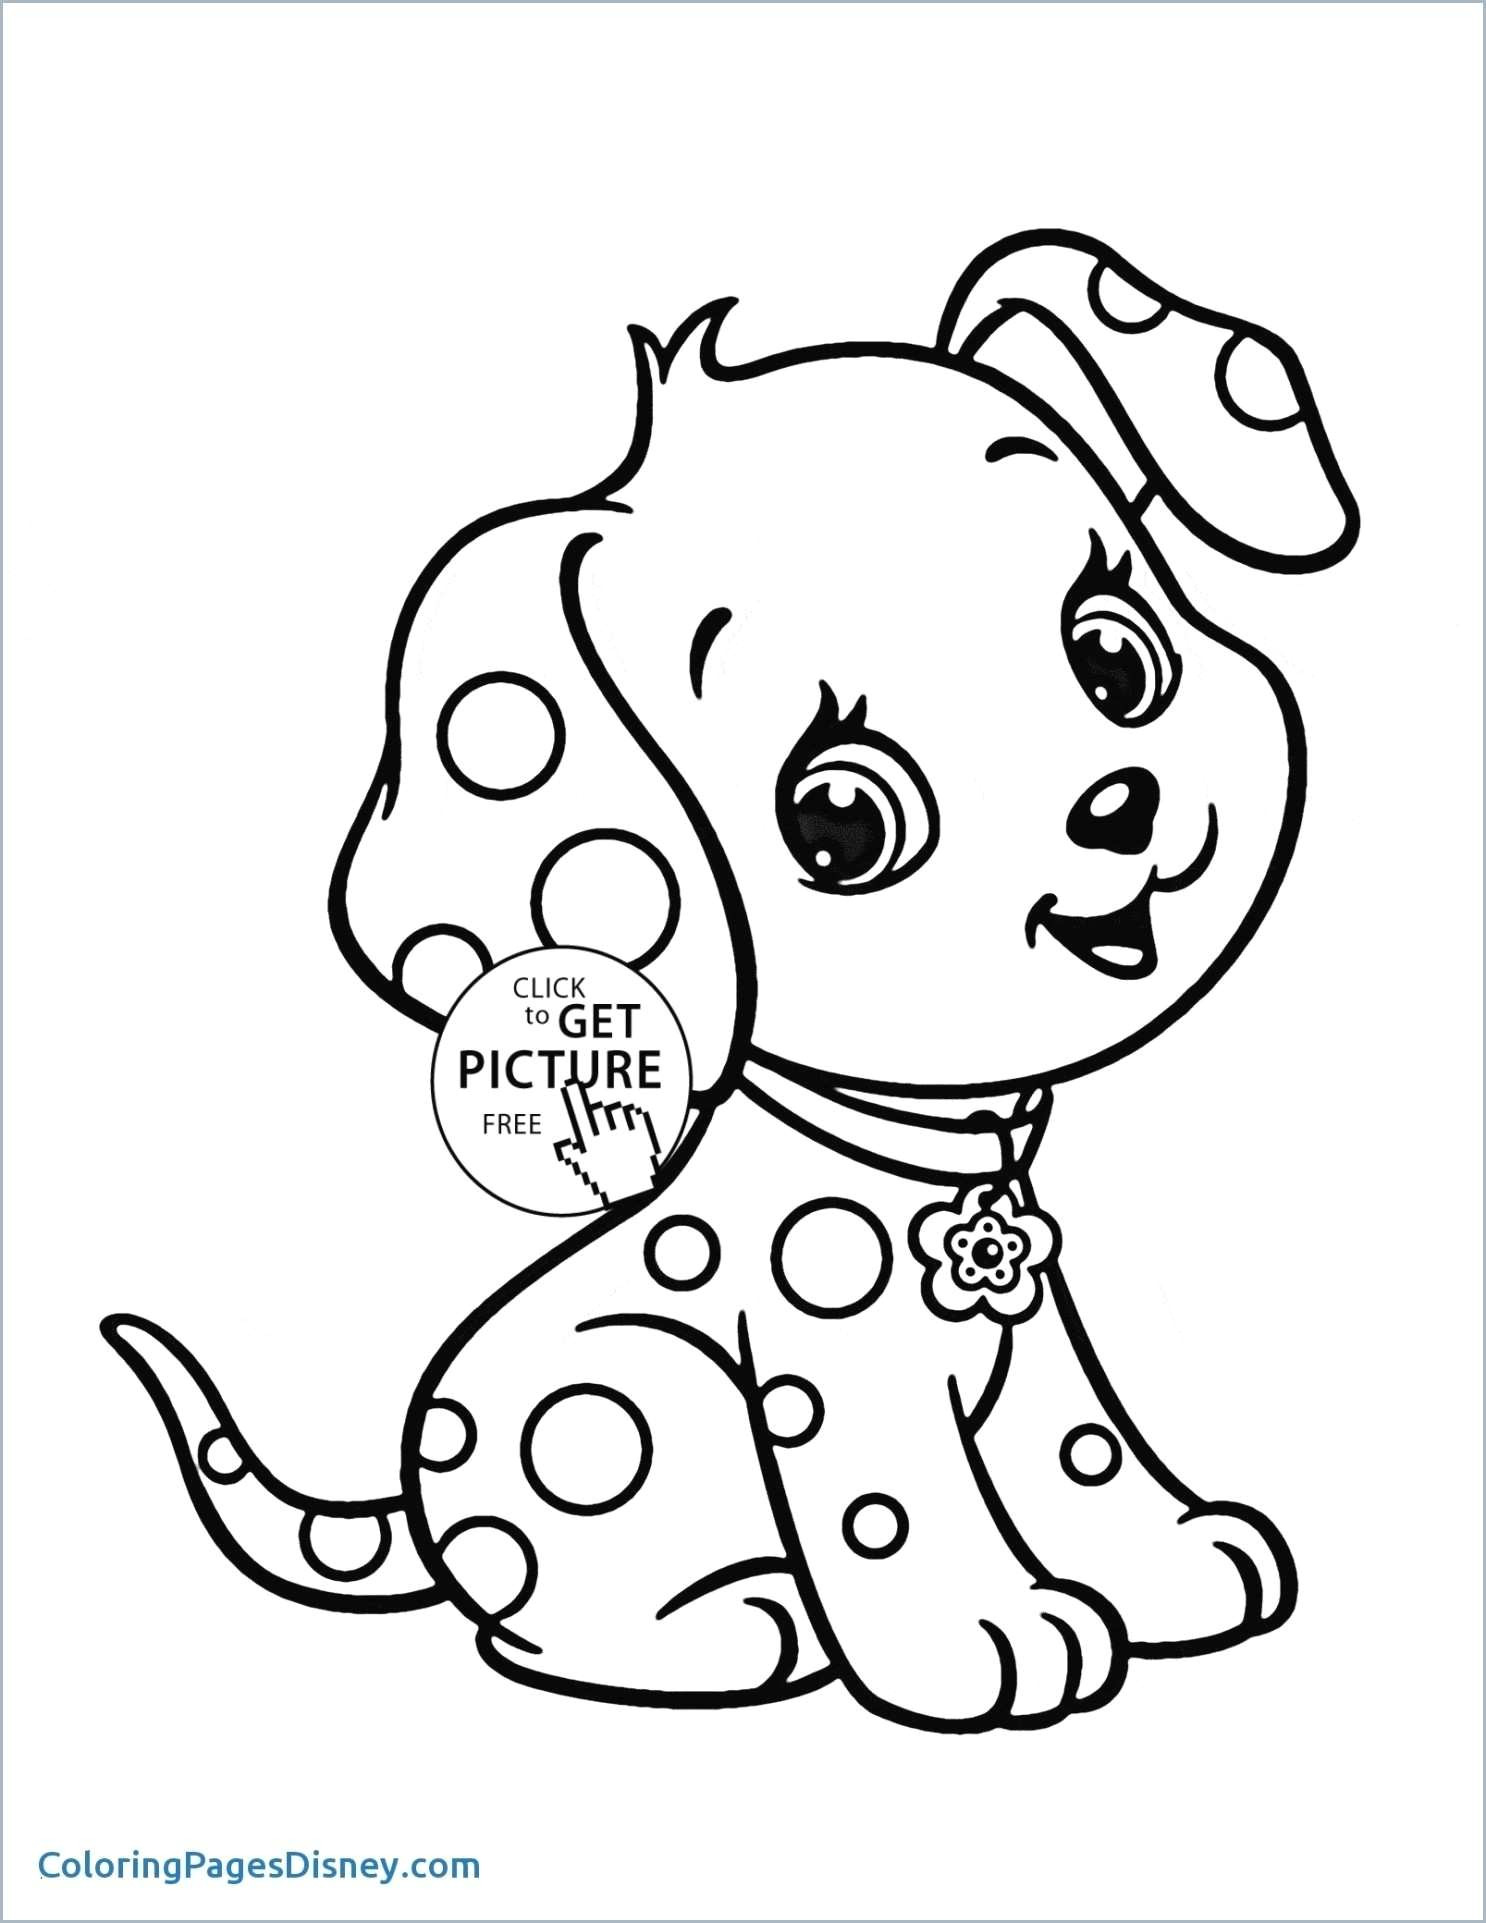 easy coloring pages halloween pleasant free halloween coloring pages free print free disney halloween of easy